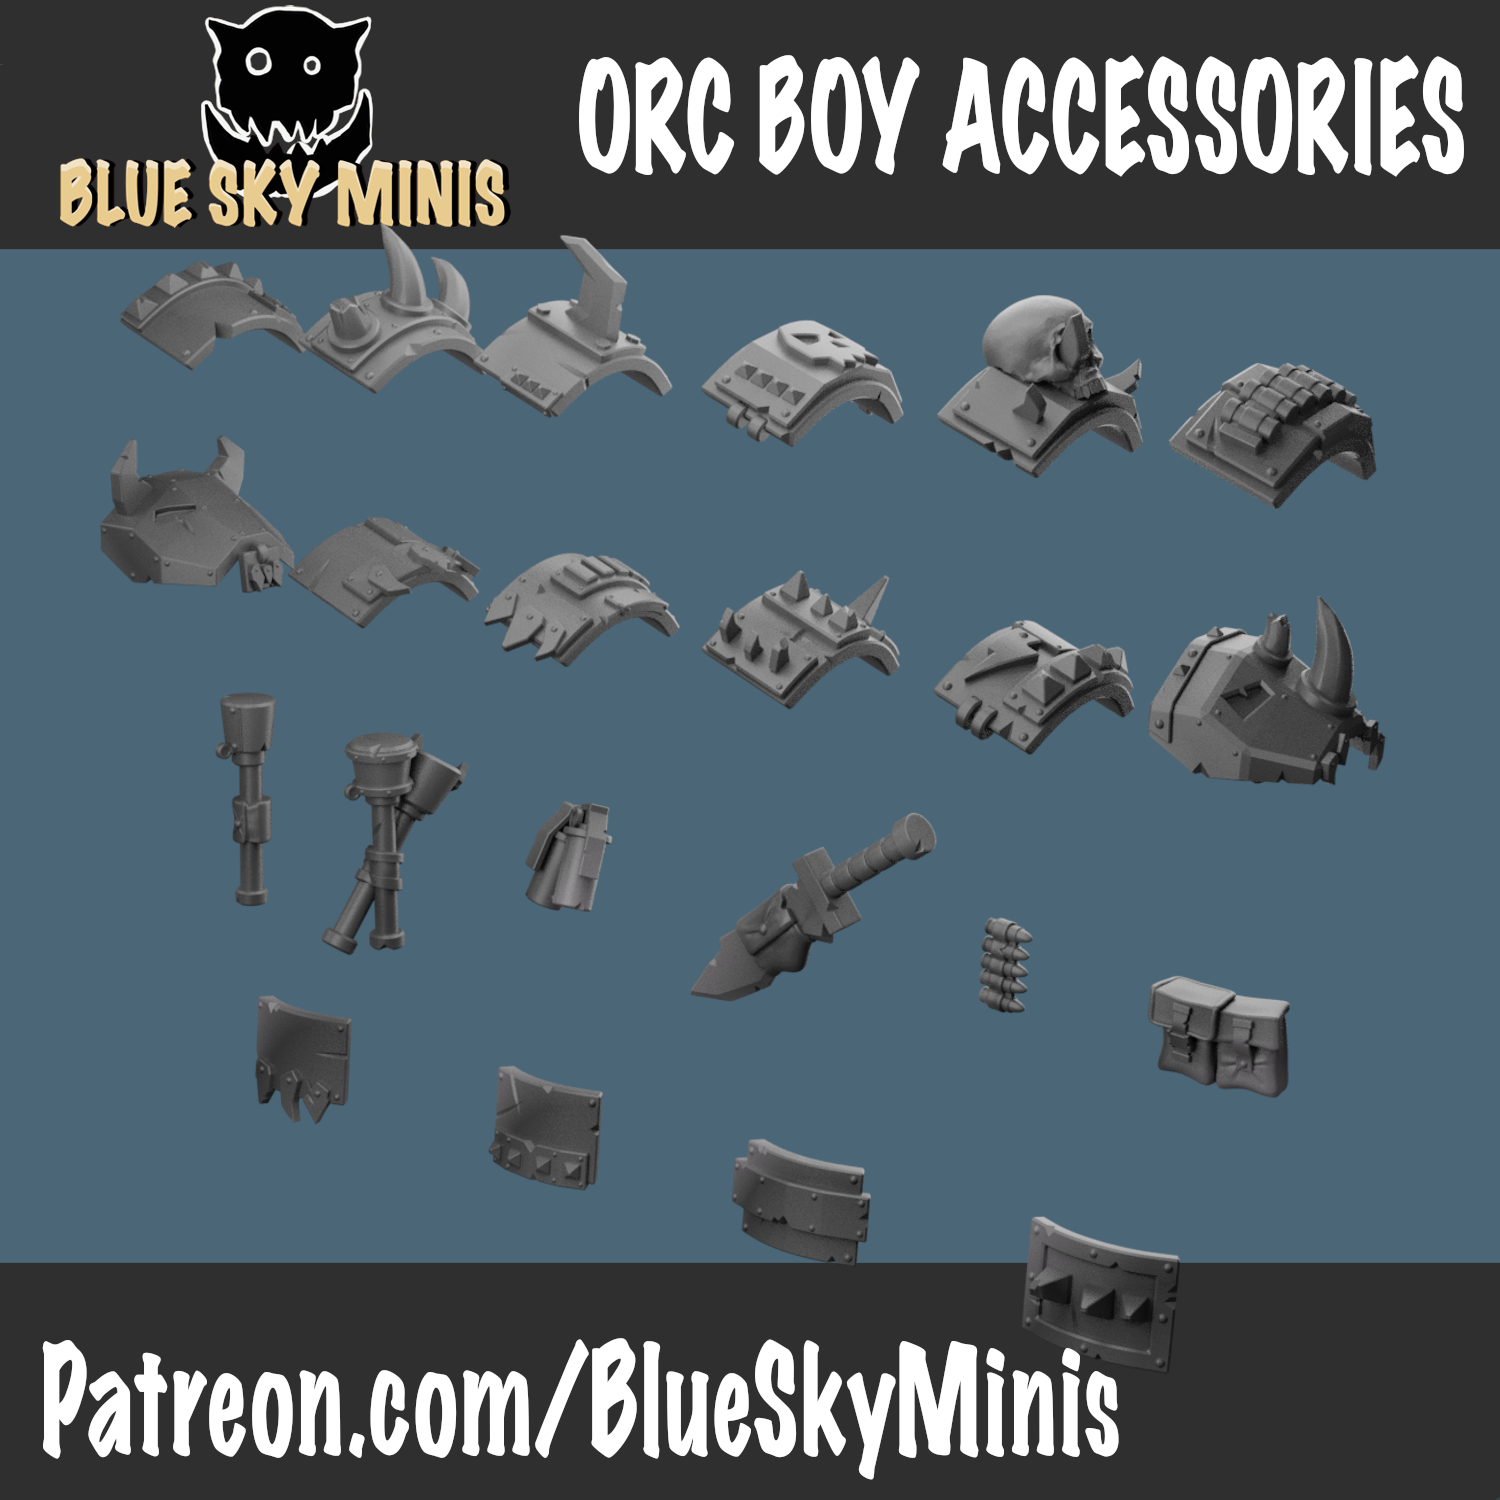 ORC BOY ACCESSORIES STORE RENDER 2